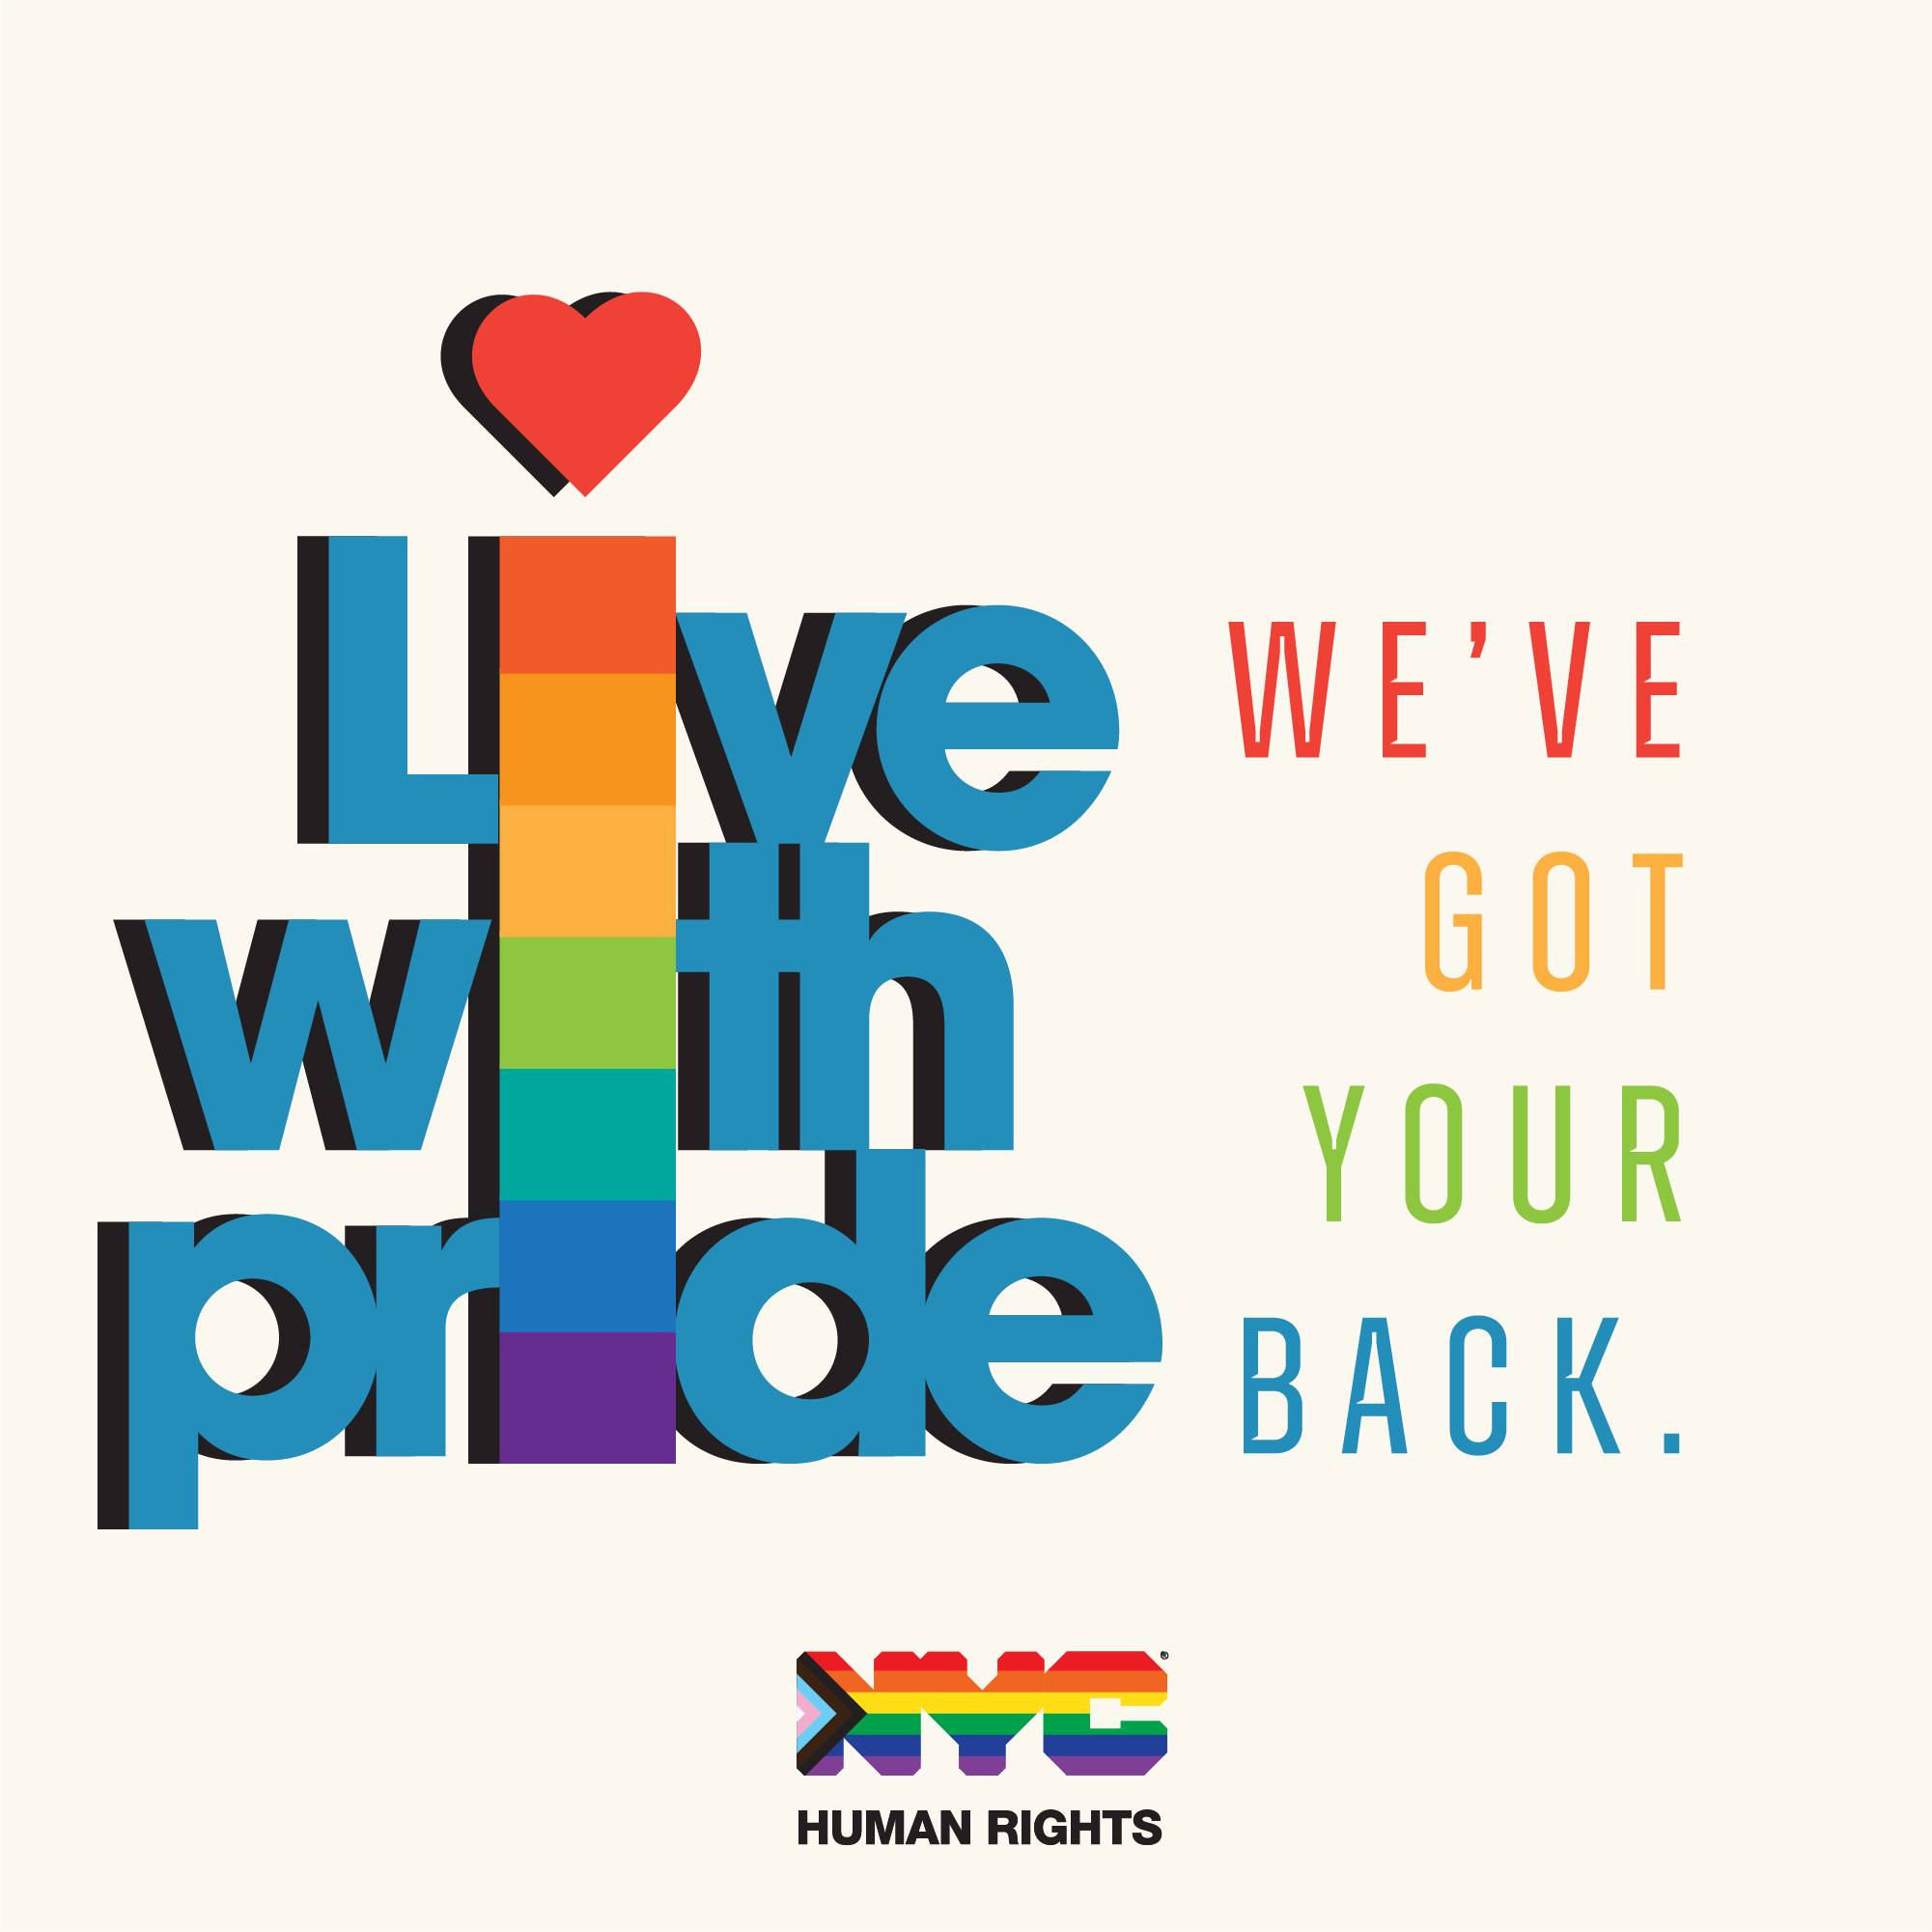 Live with pride